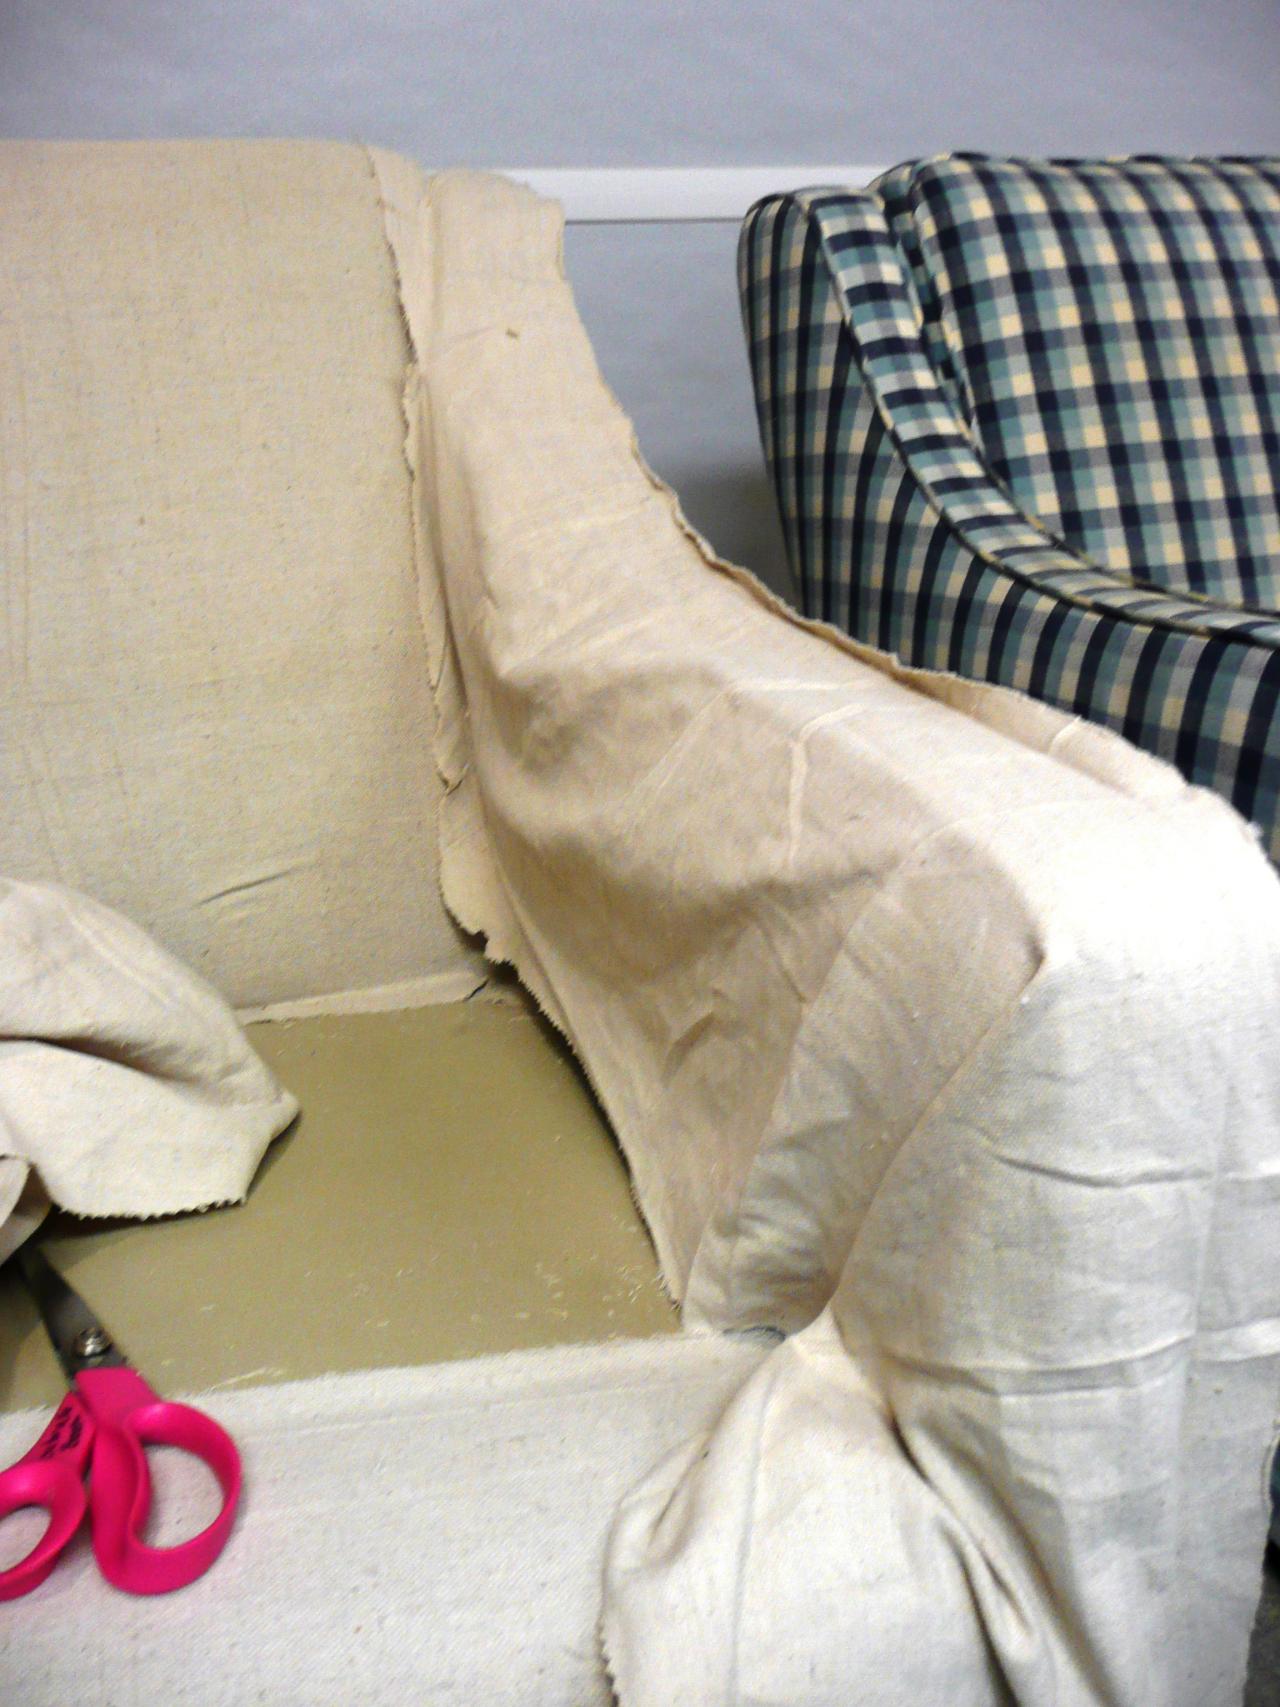 How To Make Arm Chair Slipcovers For Less Than 30 How Tos Diy